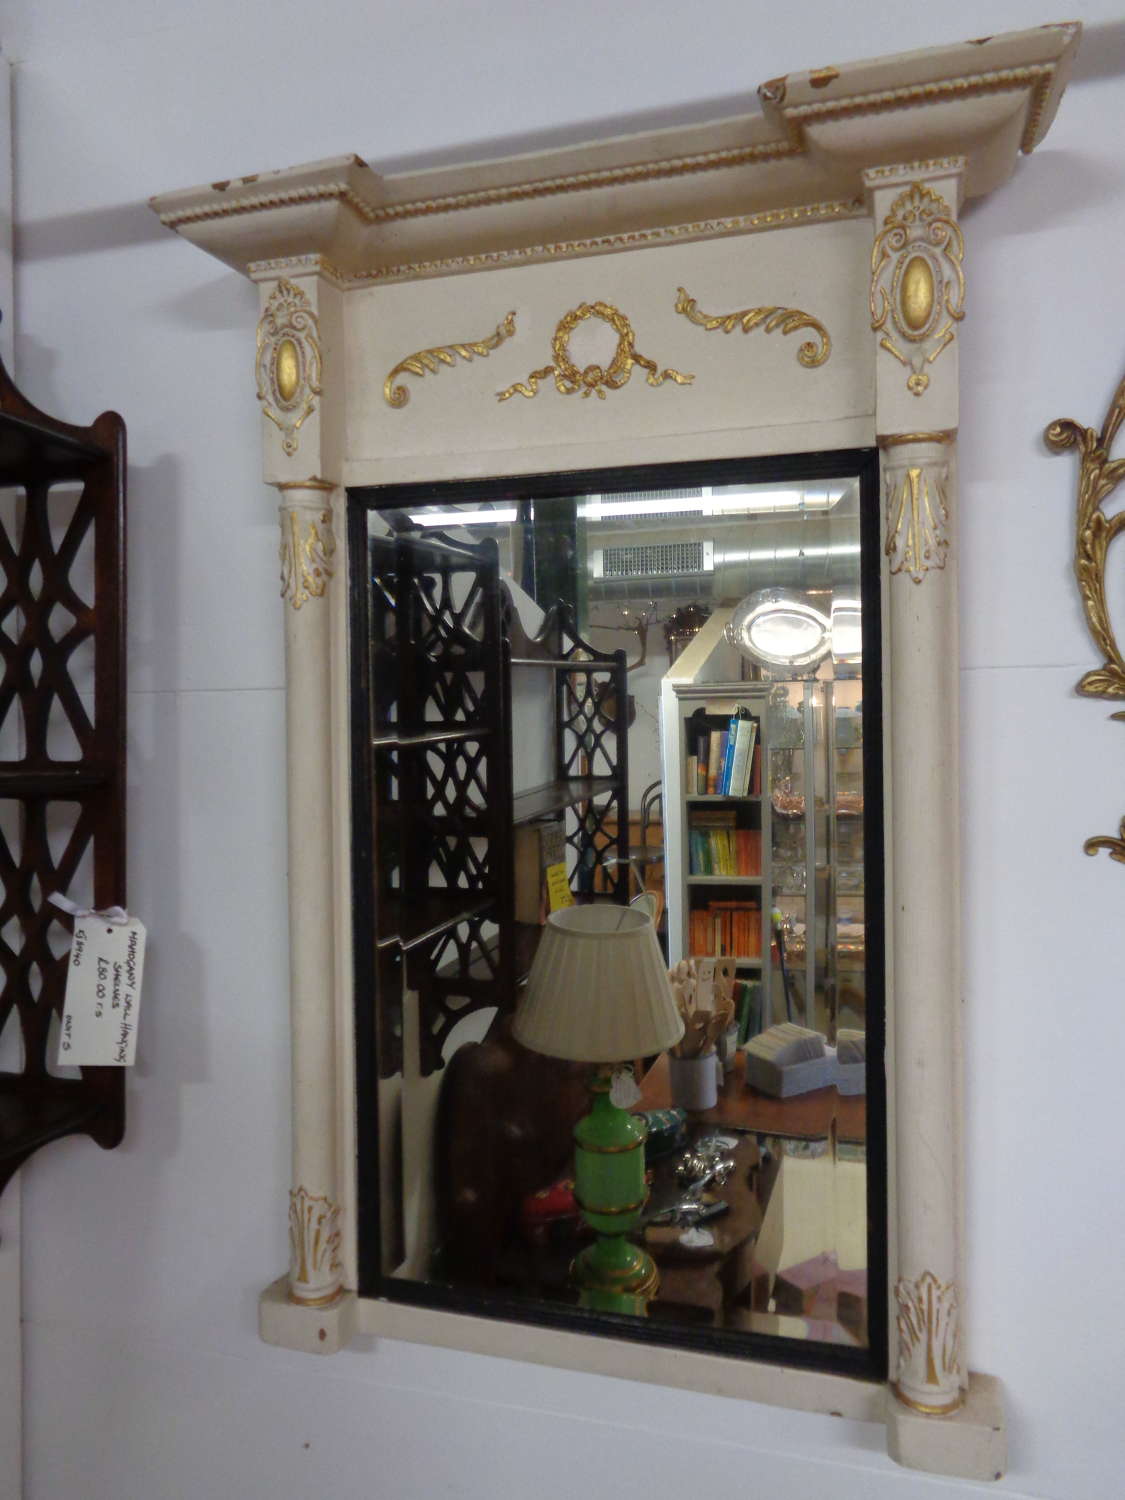 Old Painted Bevelled Wall Mirror with Garland Decoration